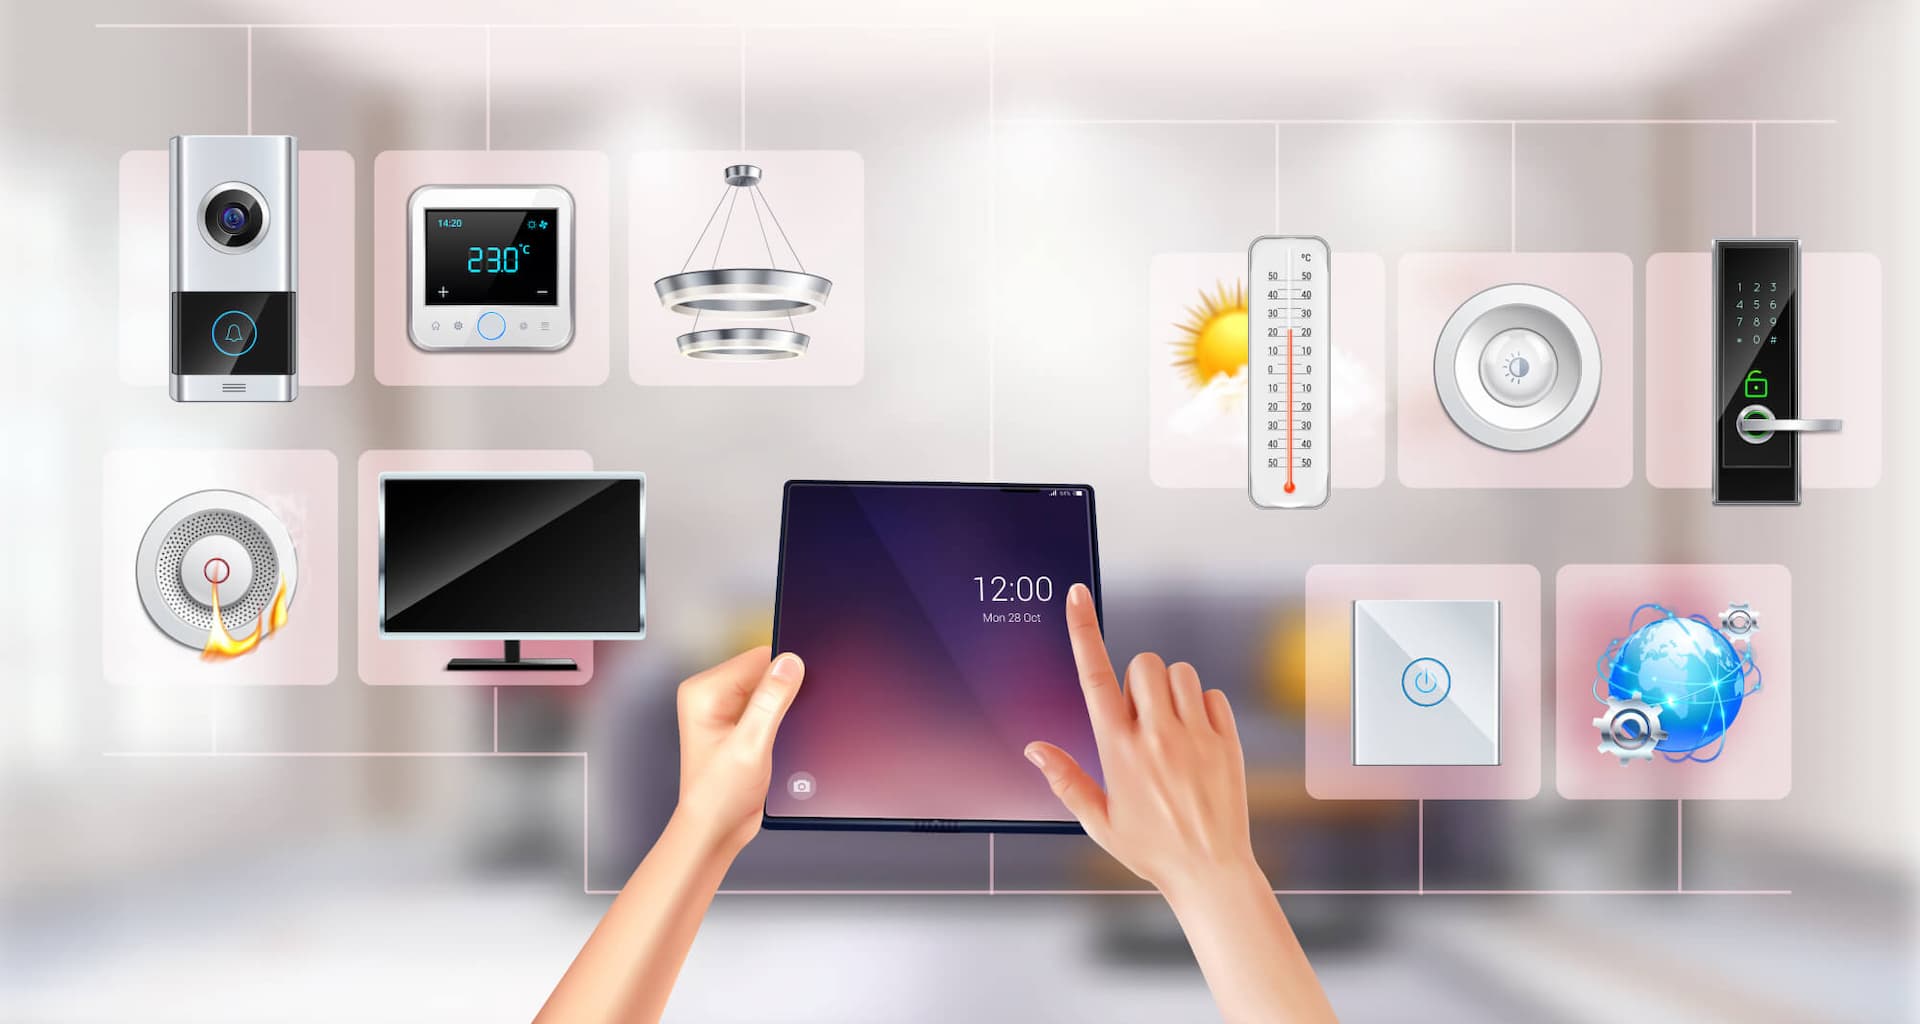 It’s amazing how you can control your home with your smartphone: Check it out!